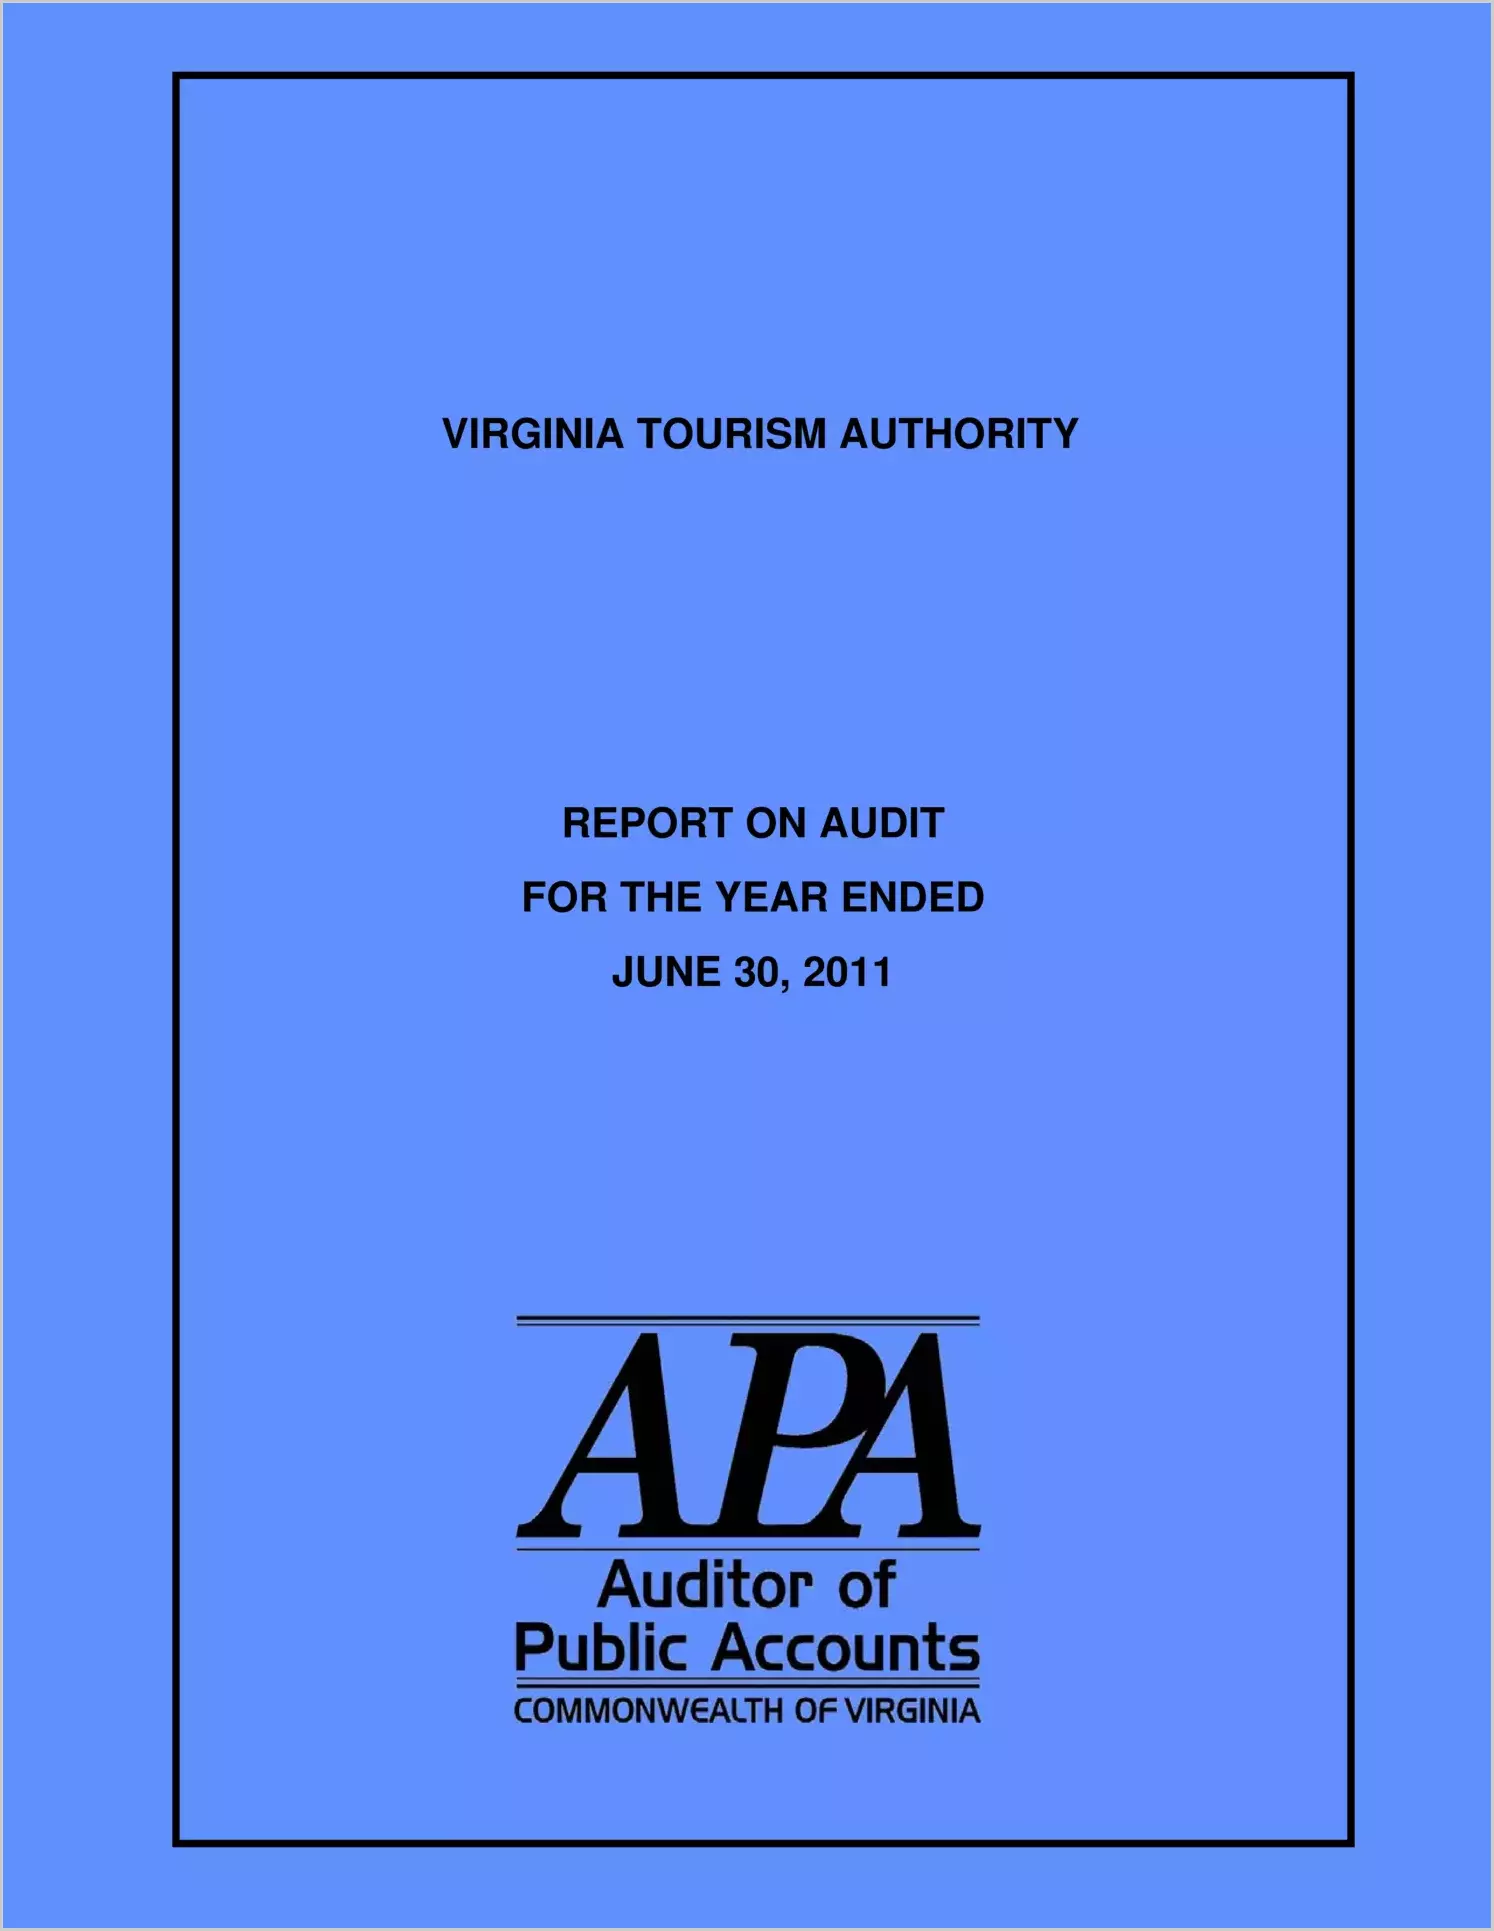 Virginia Tourism Authority for the year ended June 30, 2011